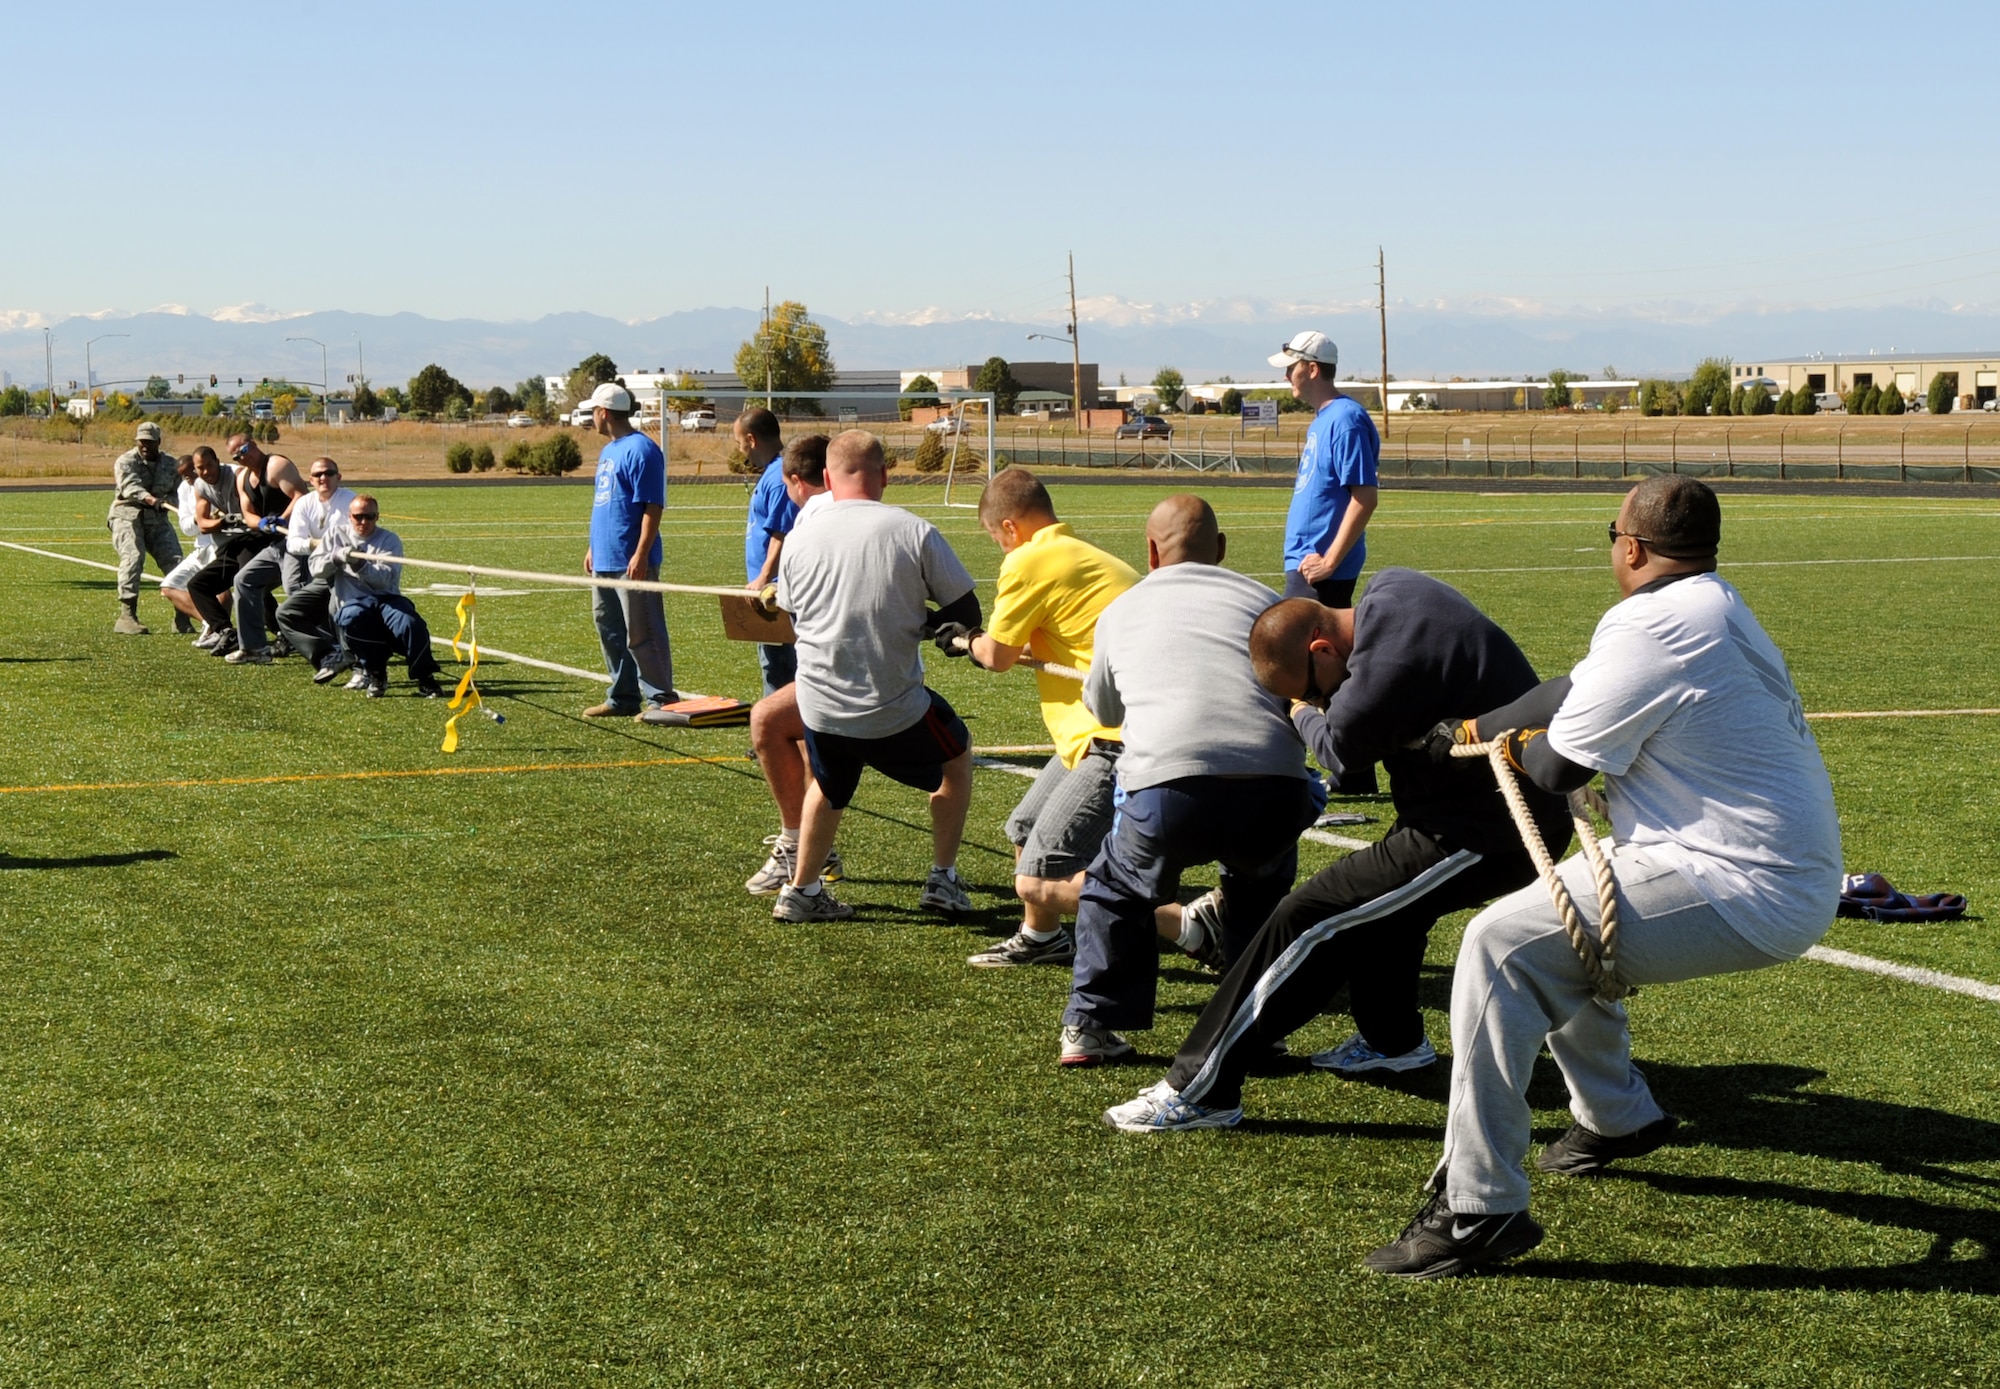 Buckley Air Force Base, Colo. – The 460th Civil Engineer Squadrons pulls Detachment 6 across the line during a tug of war game during Buckley’s Sports and Field Day Oct. 2. (U. S. Air Force photo by Senior Airman John Easterling)